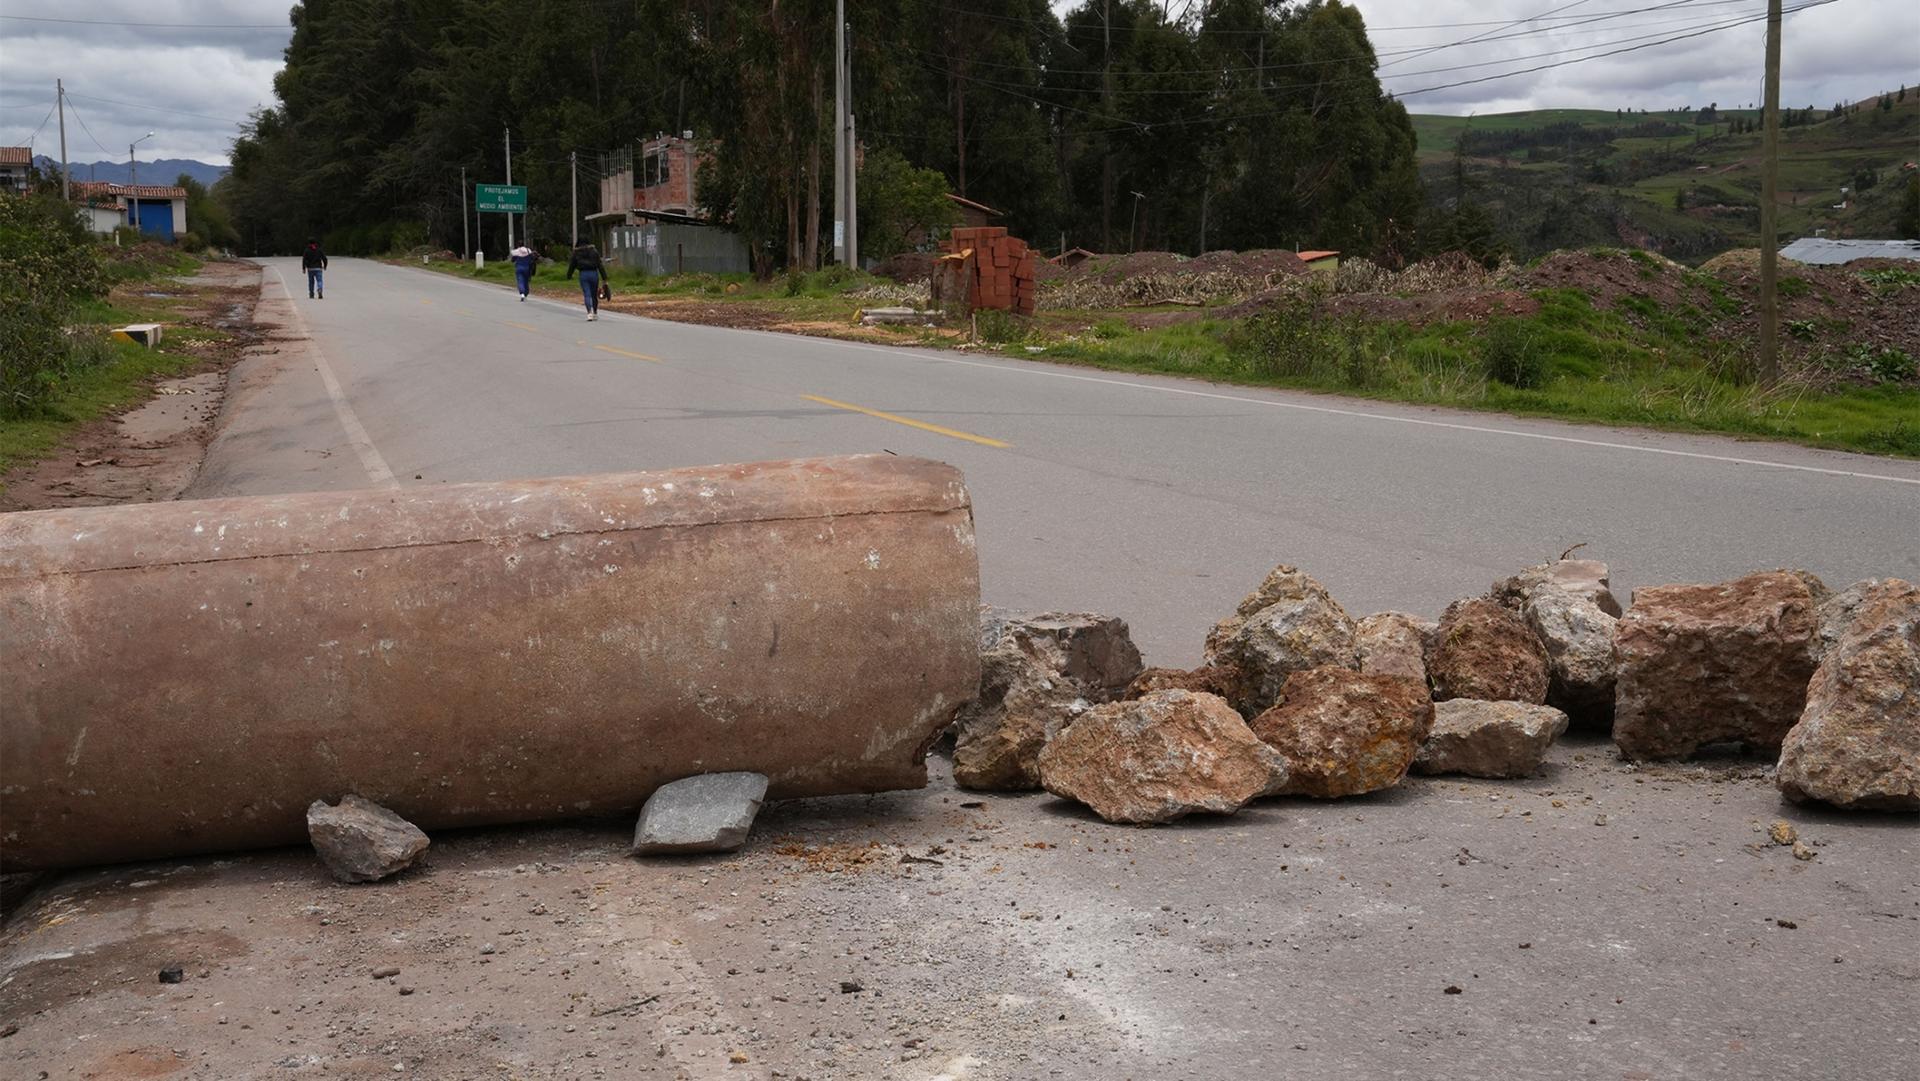 Protesters have blocked rural roads around Cuzco with rocks and logs, in an effort to stifle the economy.